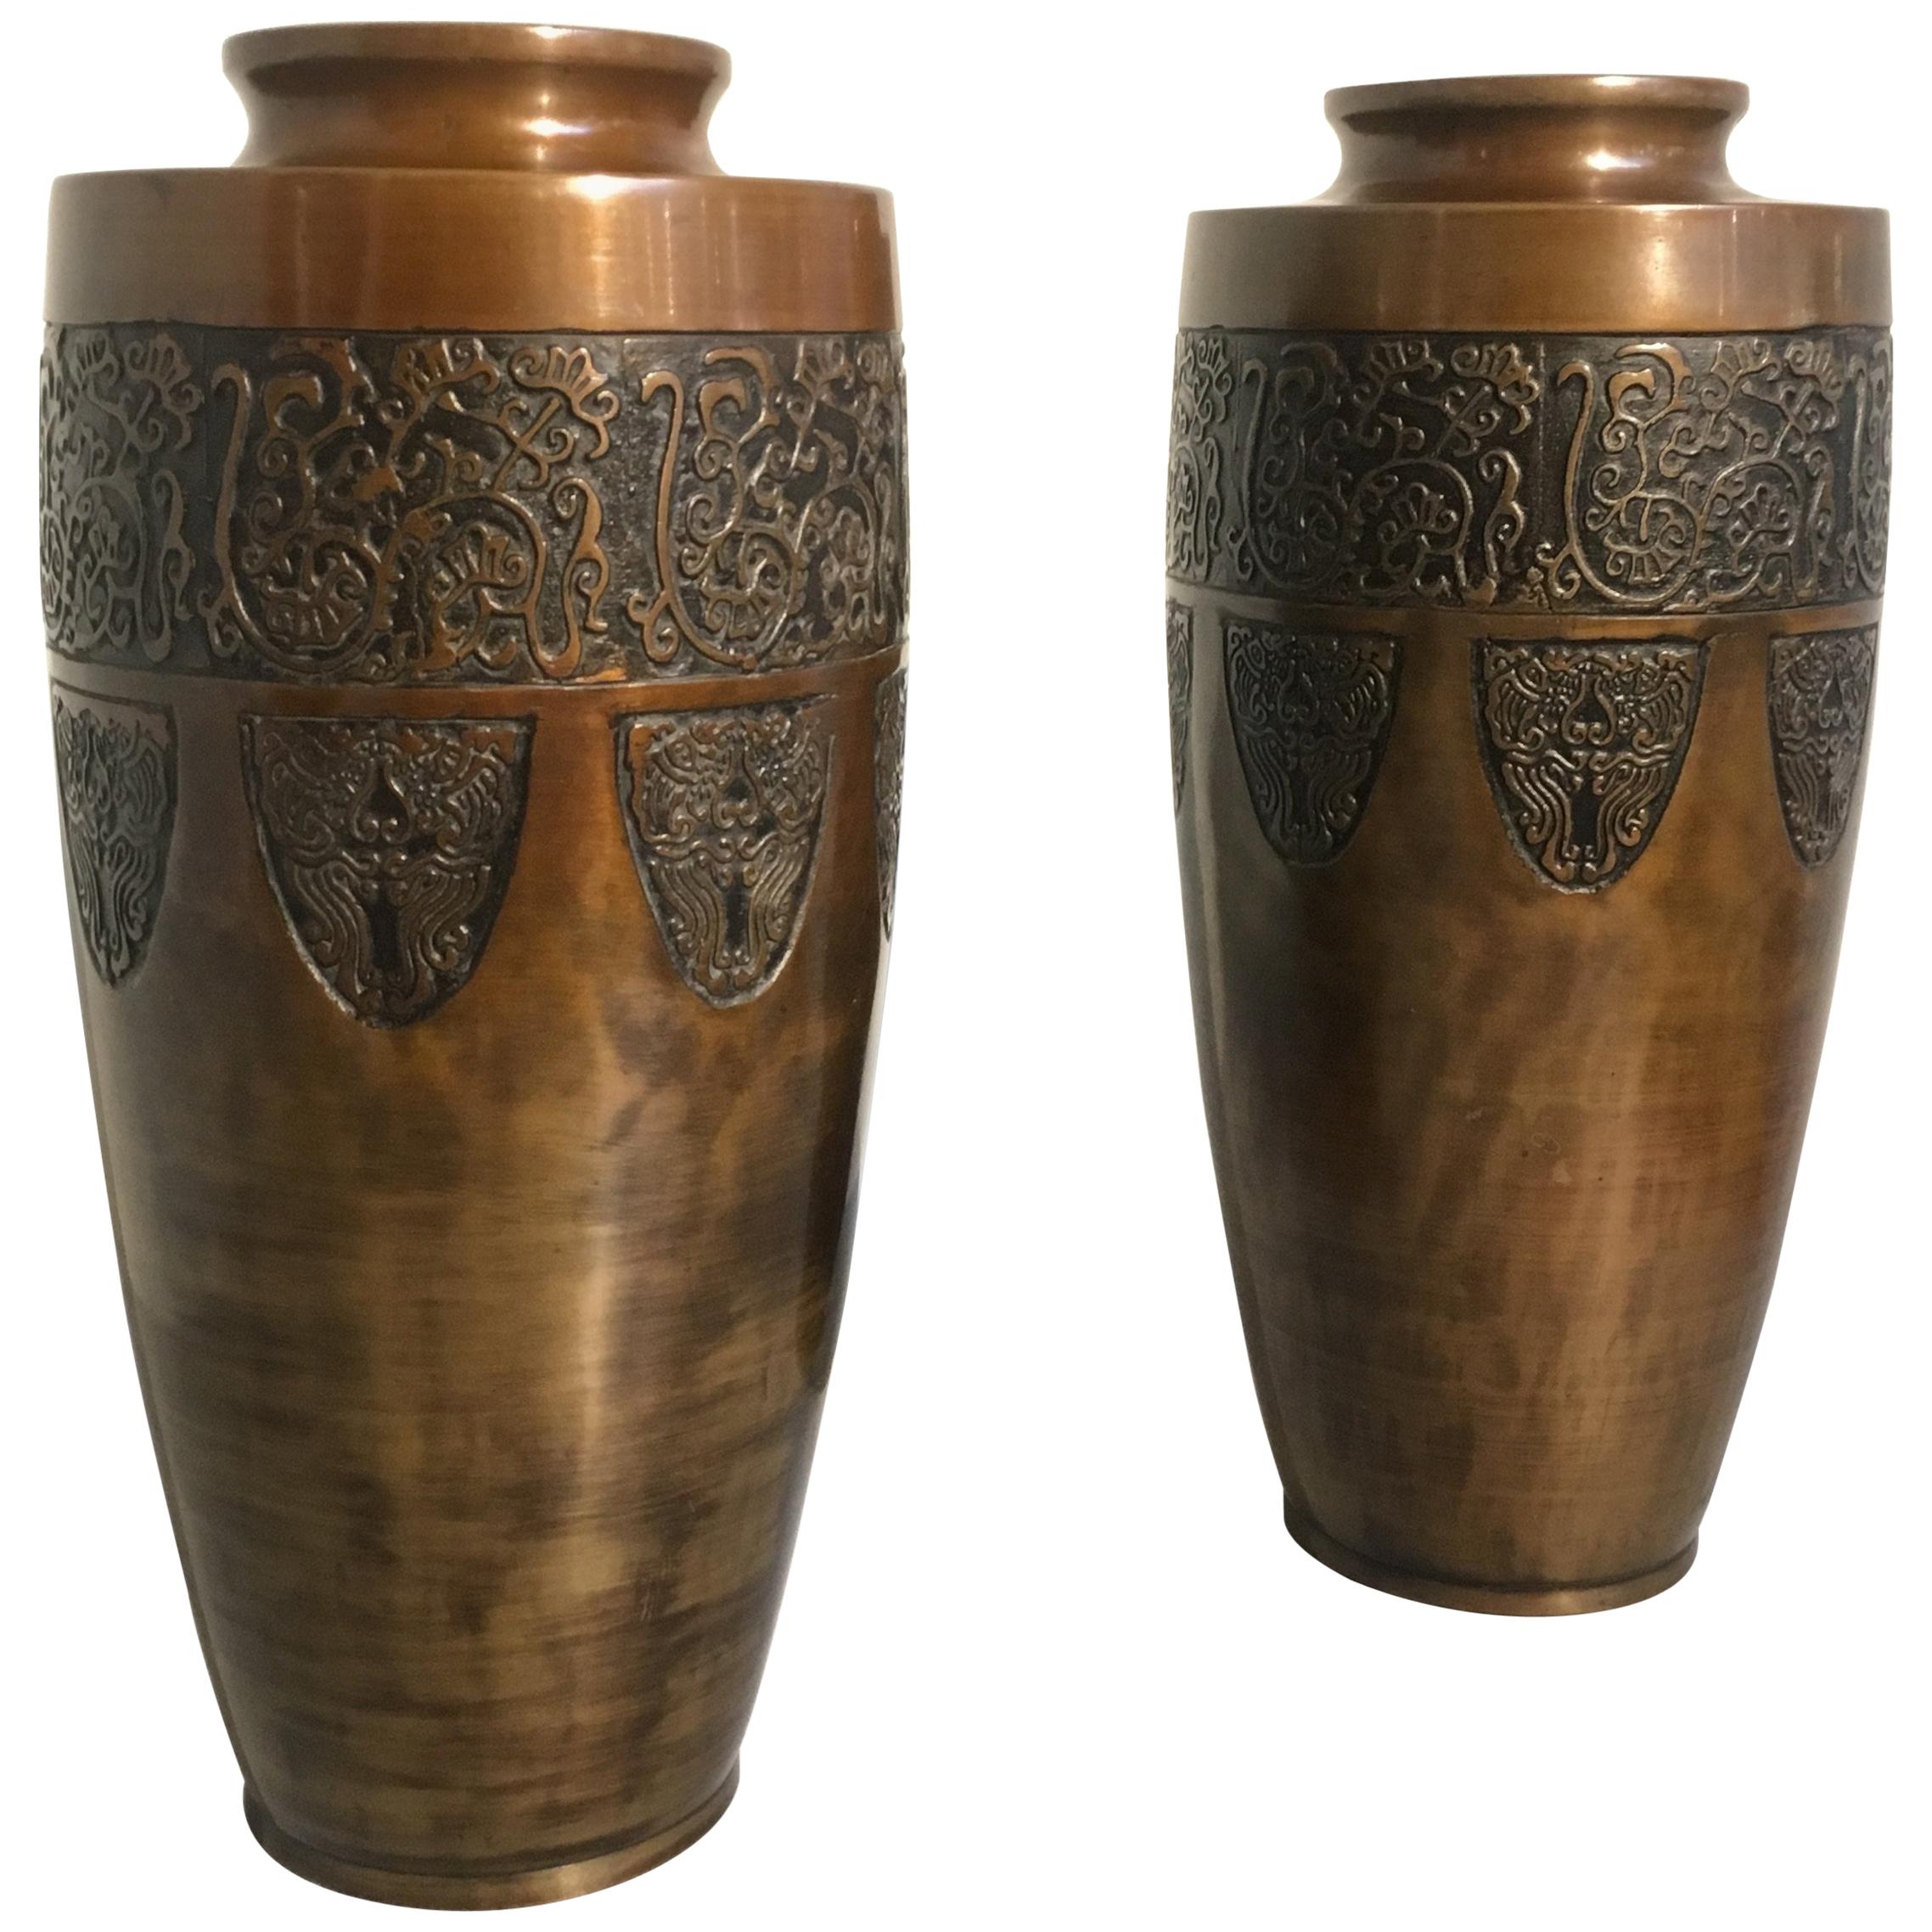 Pair of Japanese Art Deco Patinated Bronze Vases with Archaistic Motifs